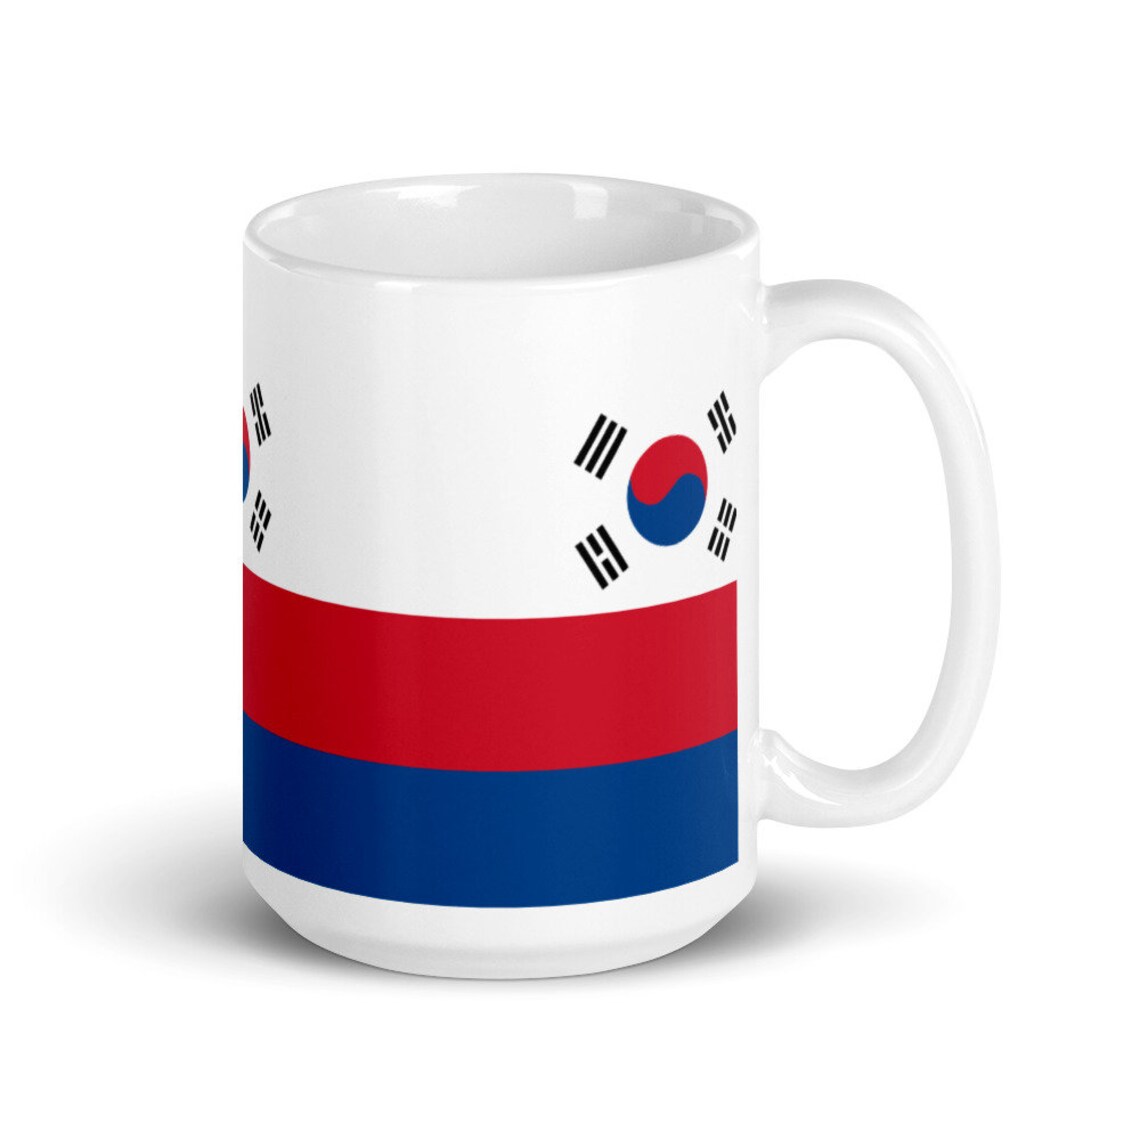 Gifts for volleyball players - Mugs inspired by the flag of Korea by Volleybragswag.